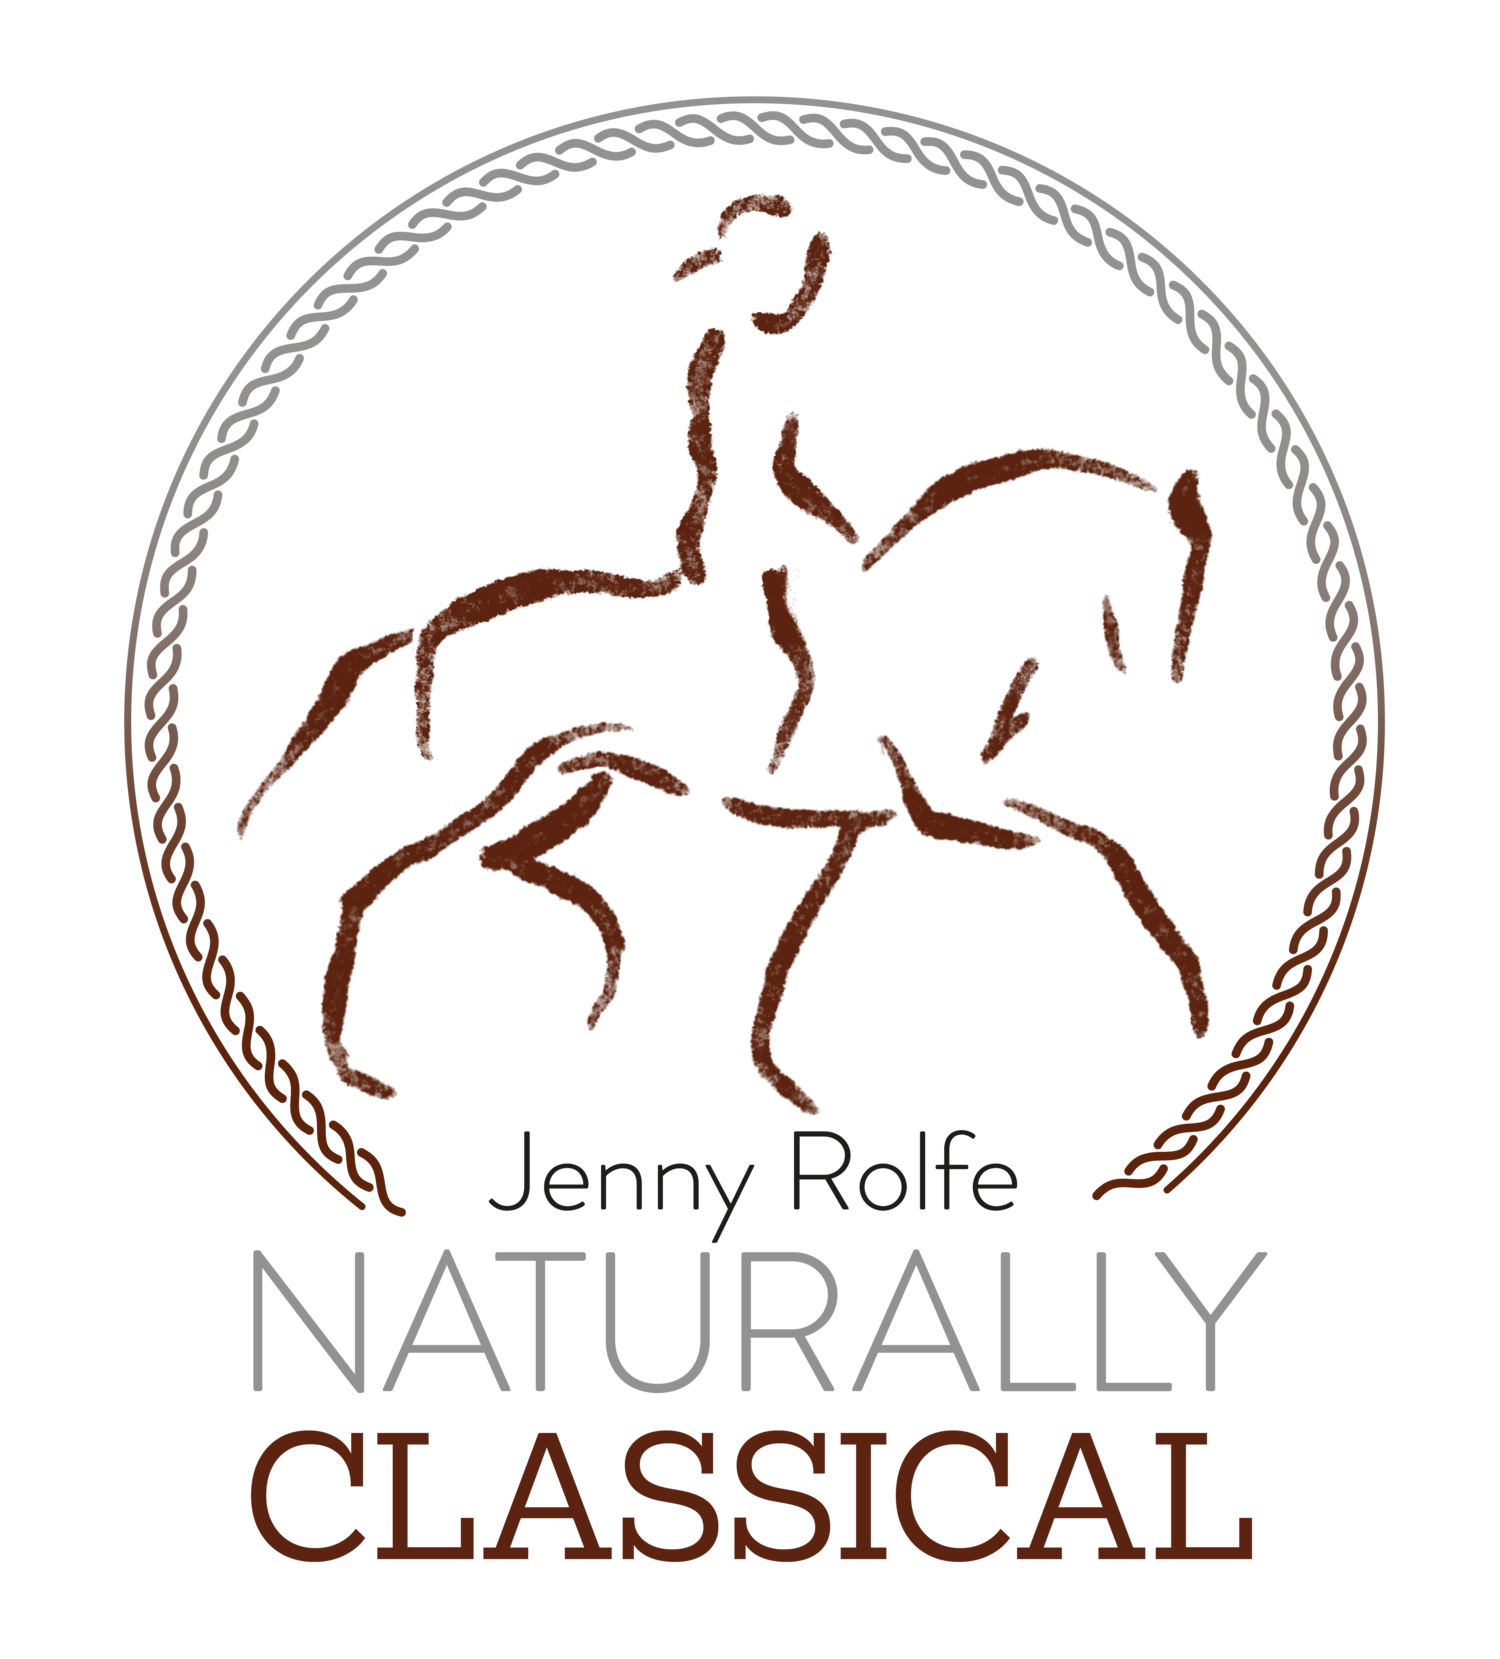 NATURALLY CLASSICAL